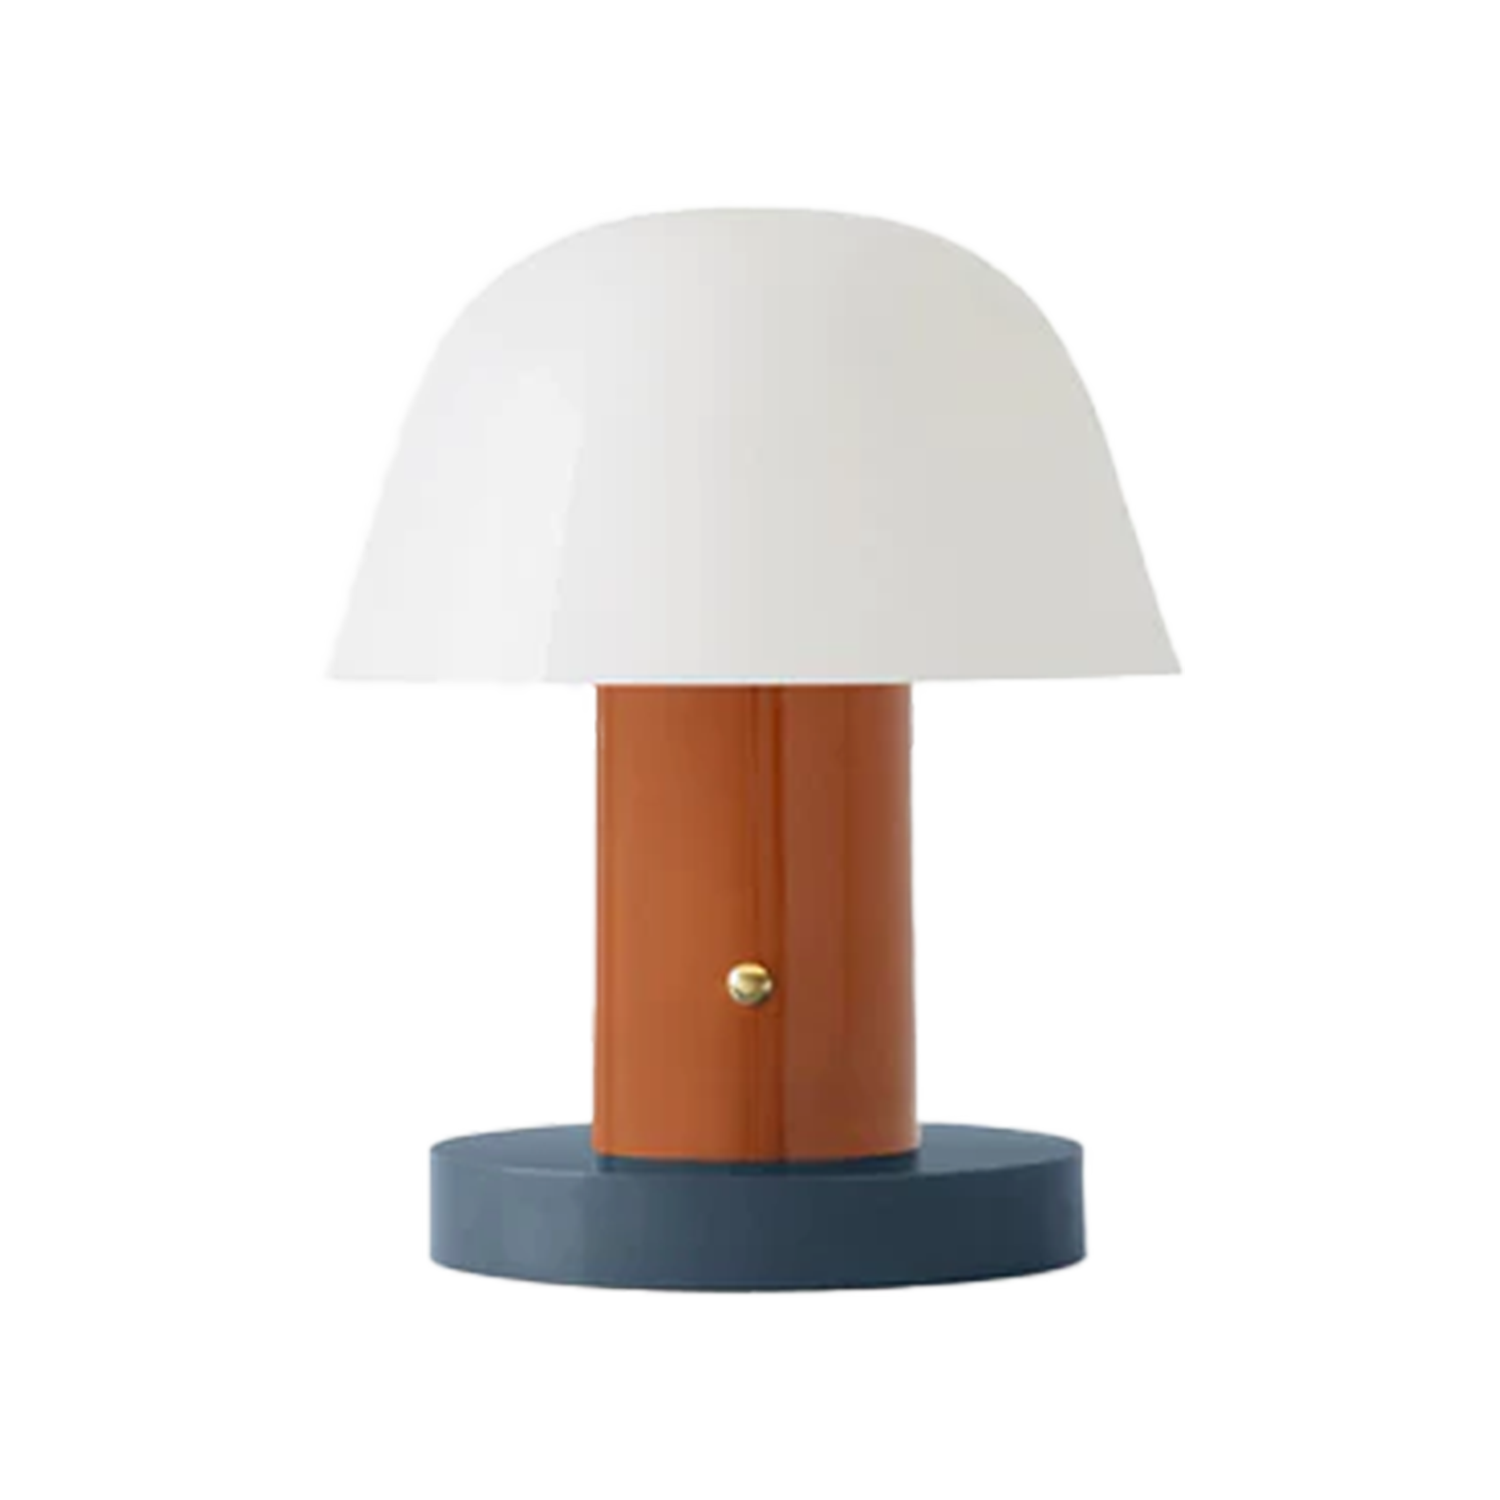 Mini Table Lamps Are the Ticket to a Cozy Glow During Wintertime